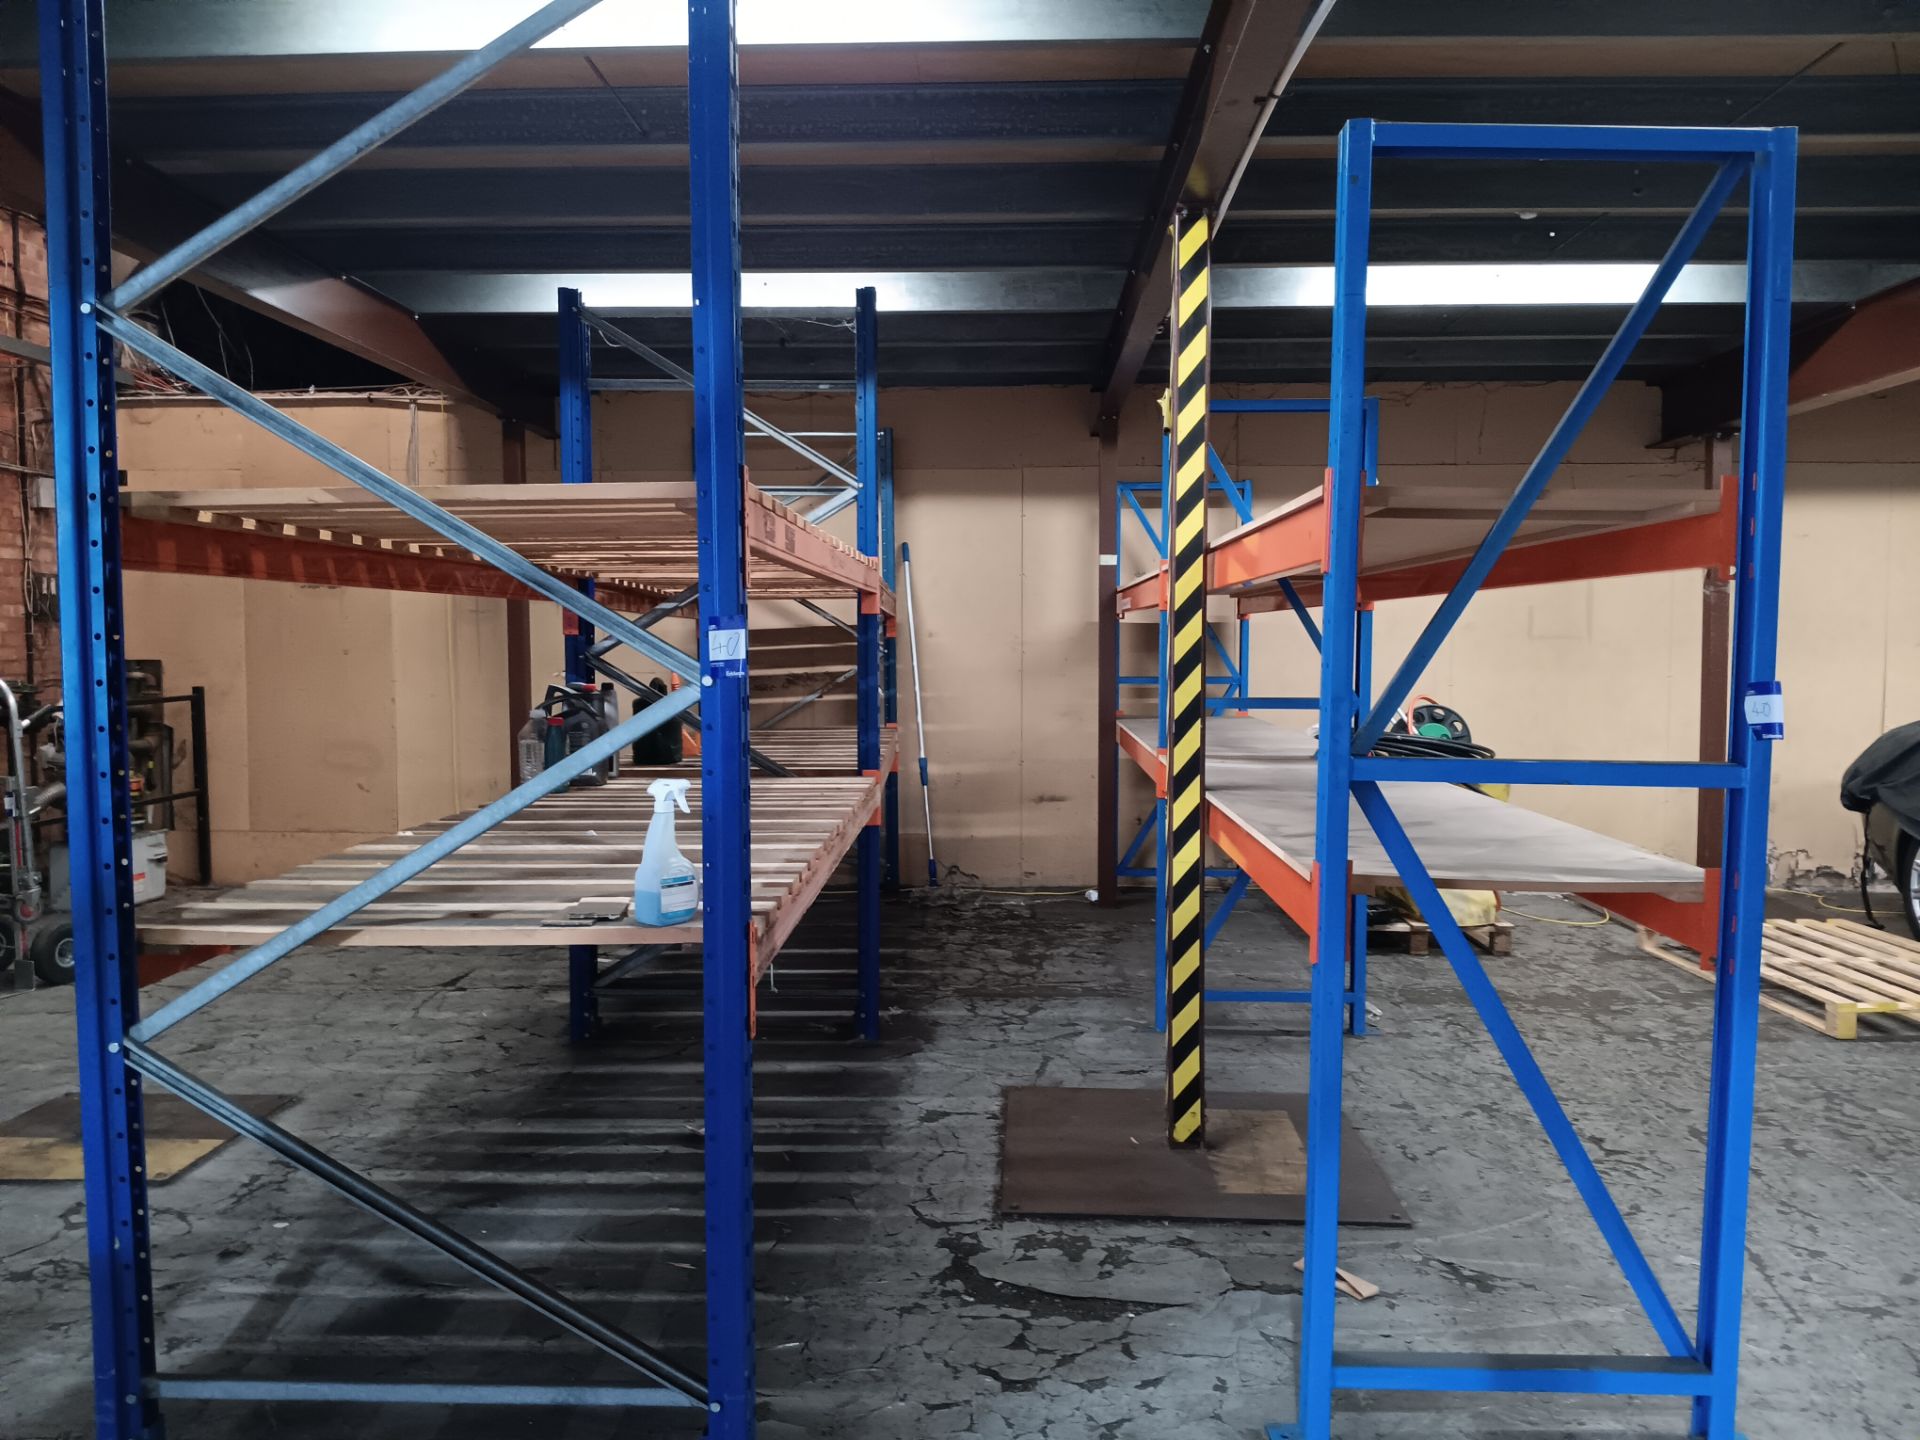 4 bays of orange and blue bolt-less racking height